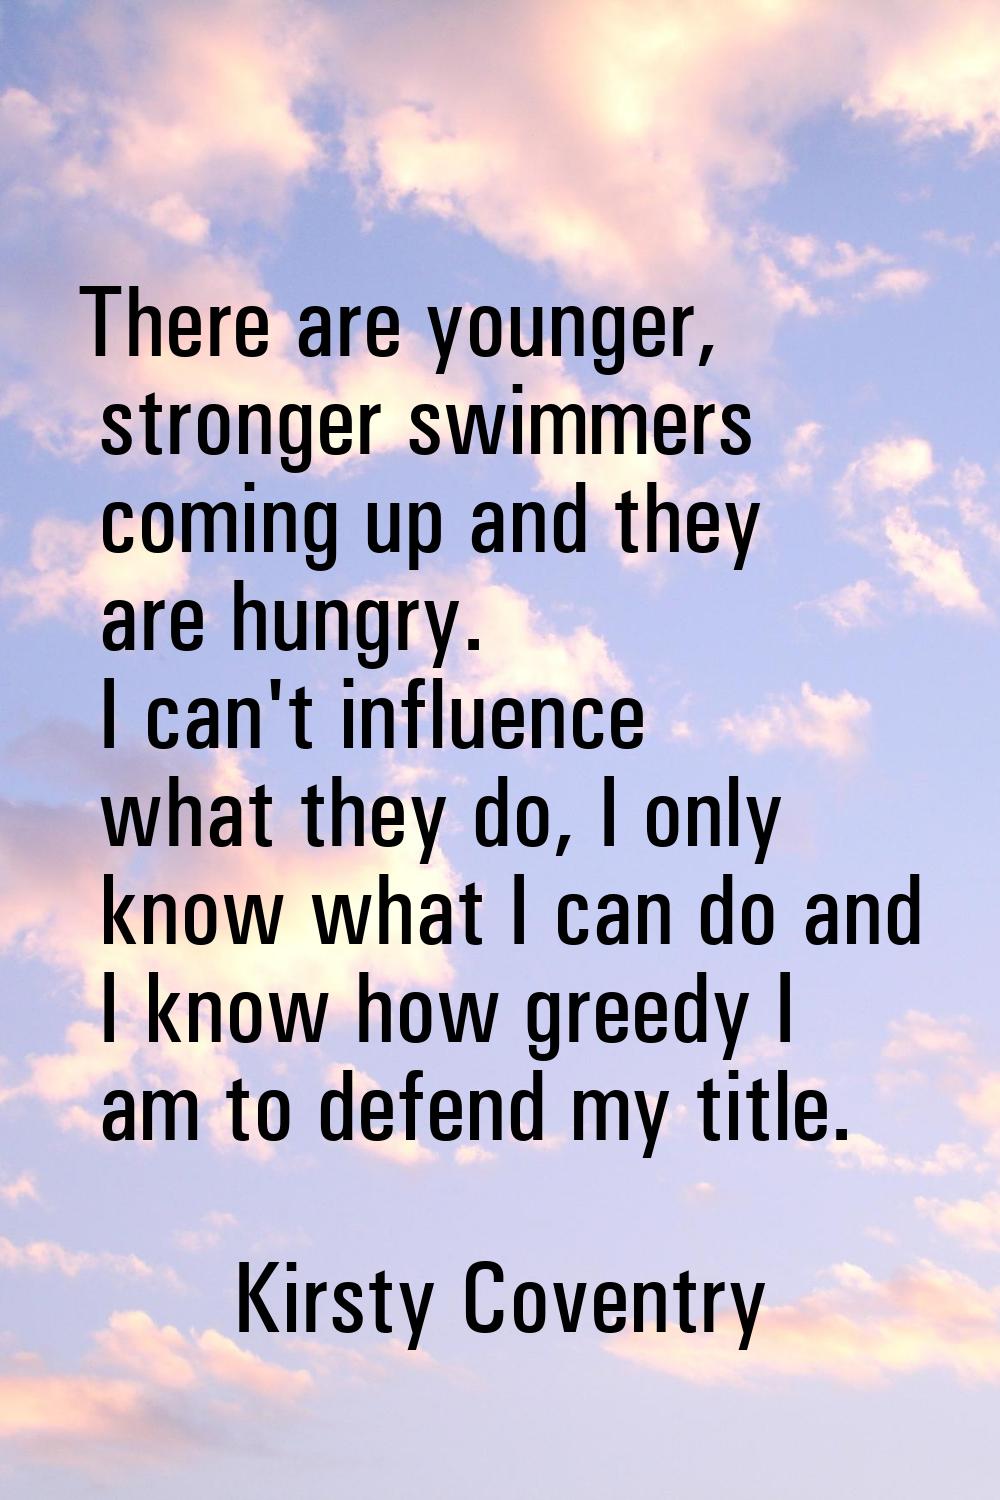 There are younger, stronger swimmers coming up and they are hungry. I can't influence what they do,